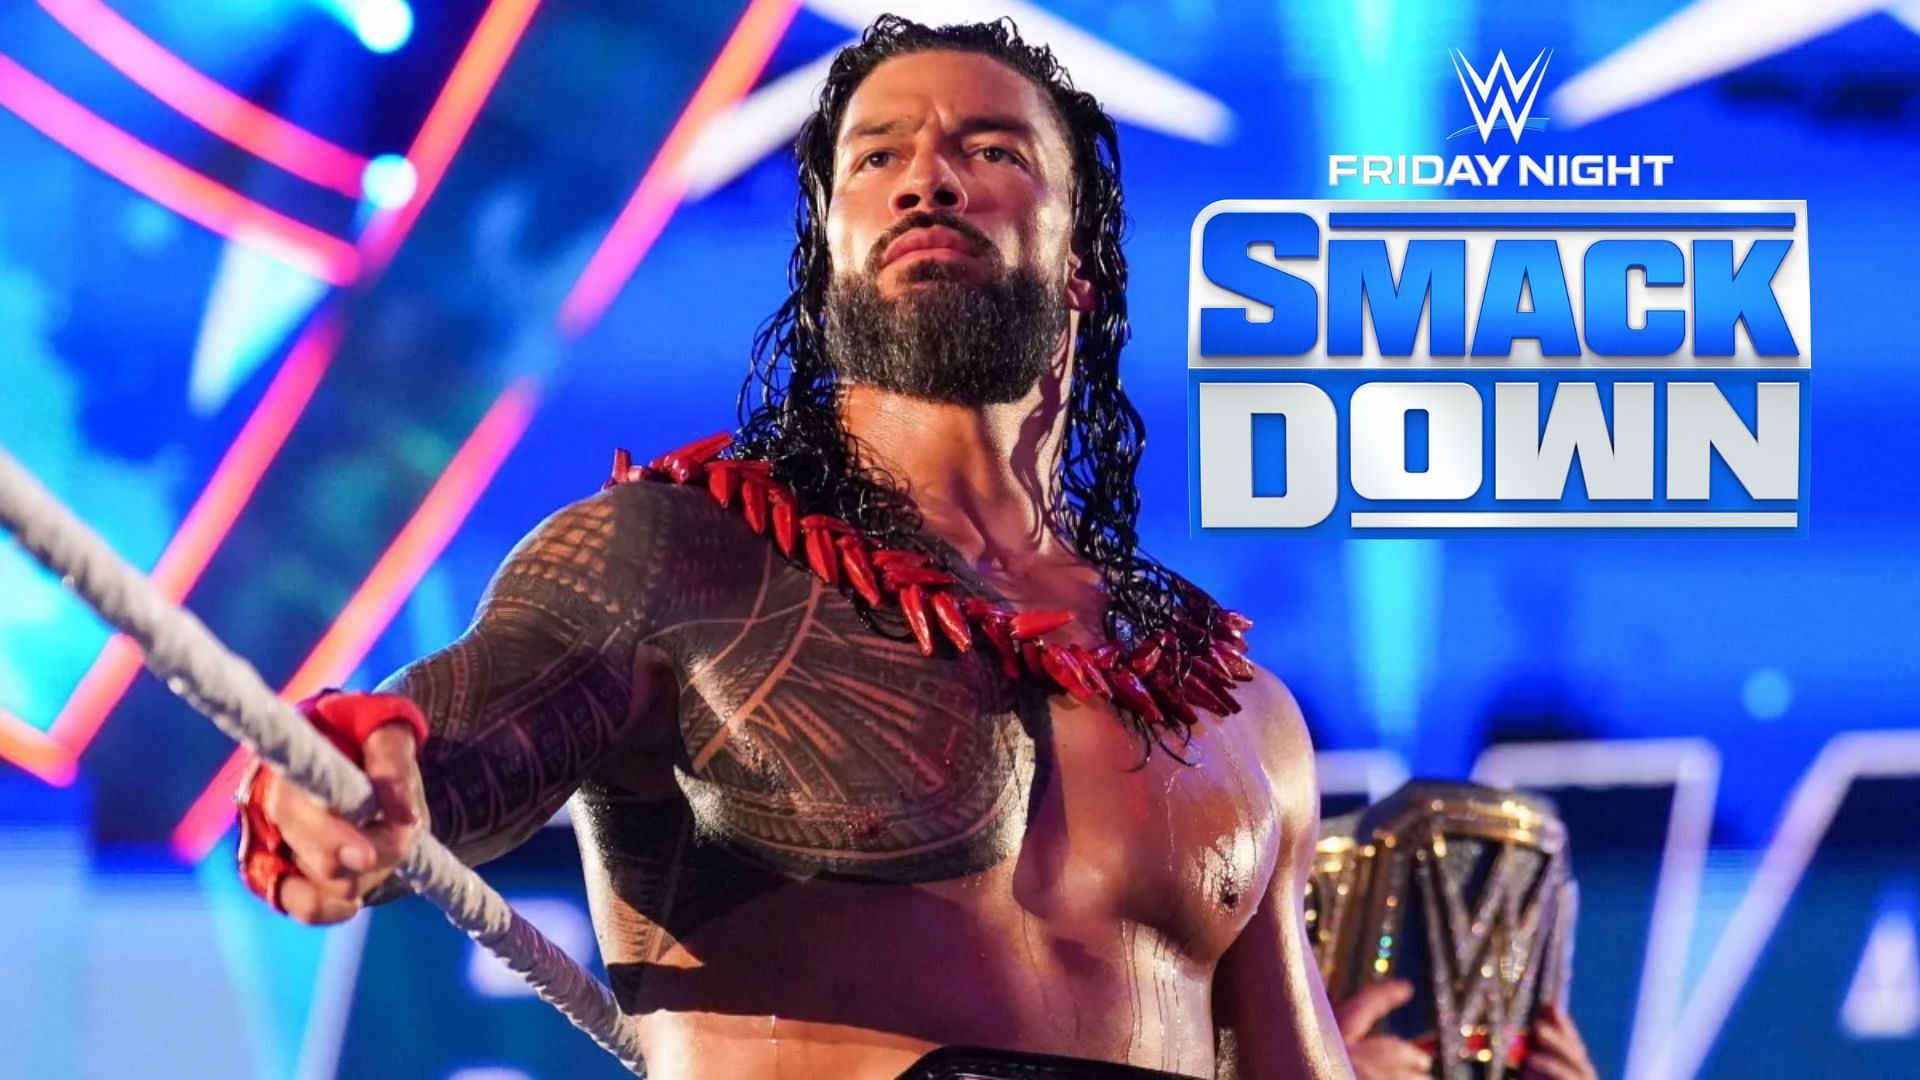 Roman Reigns will be on SmackDown this week.